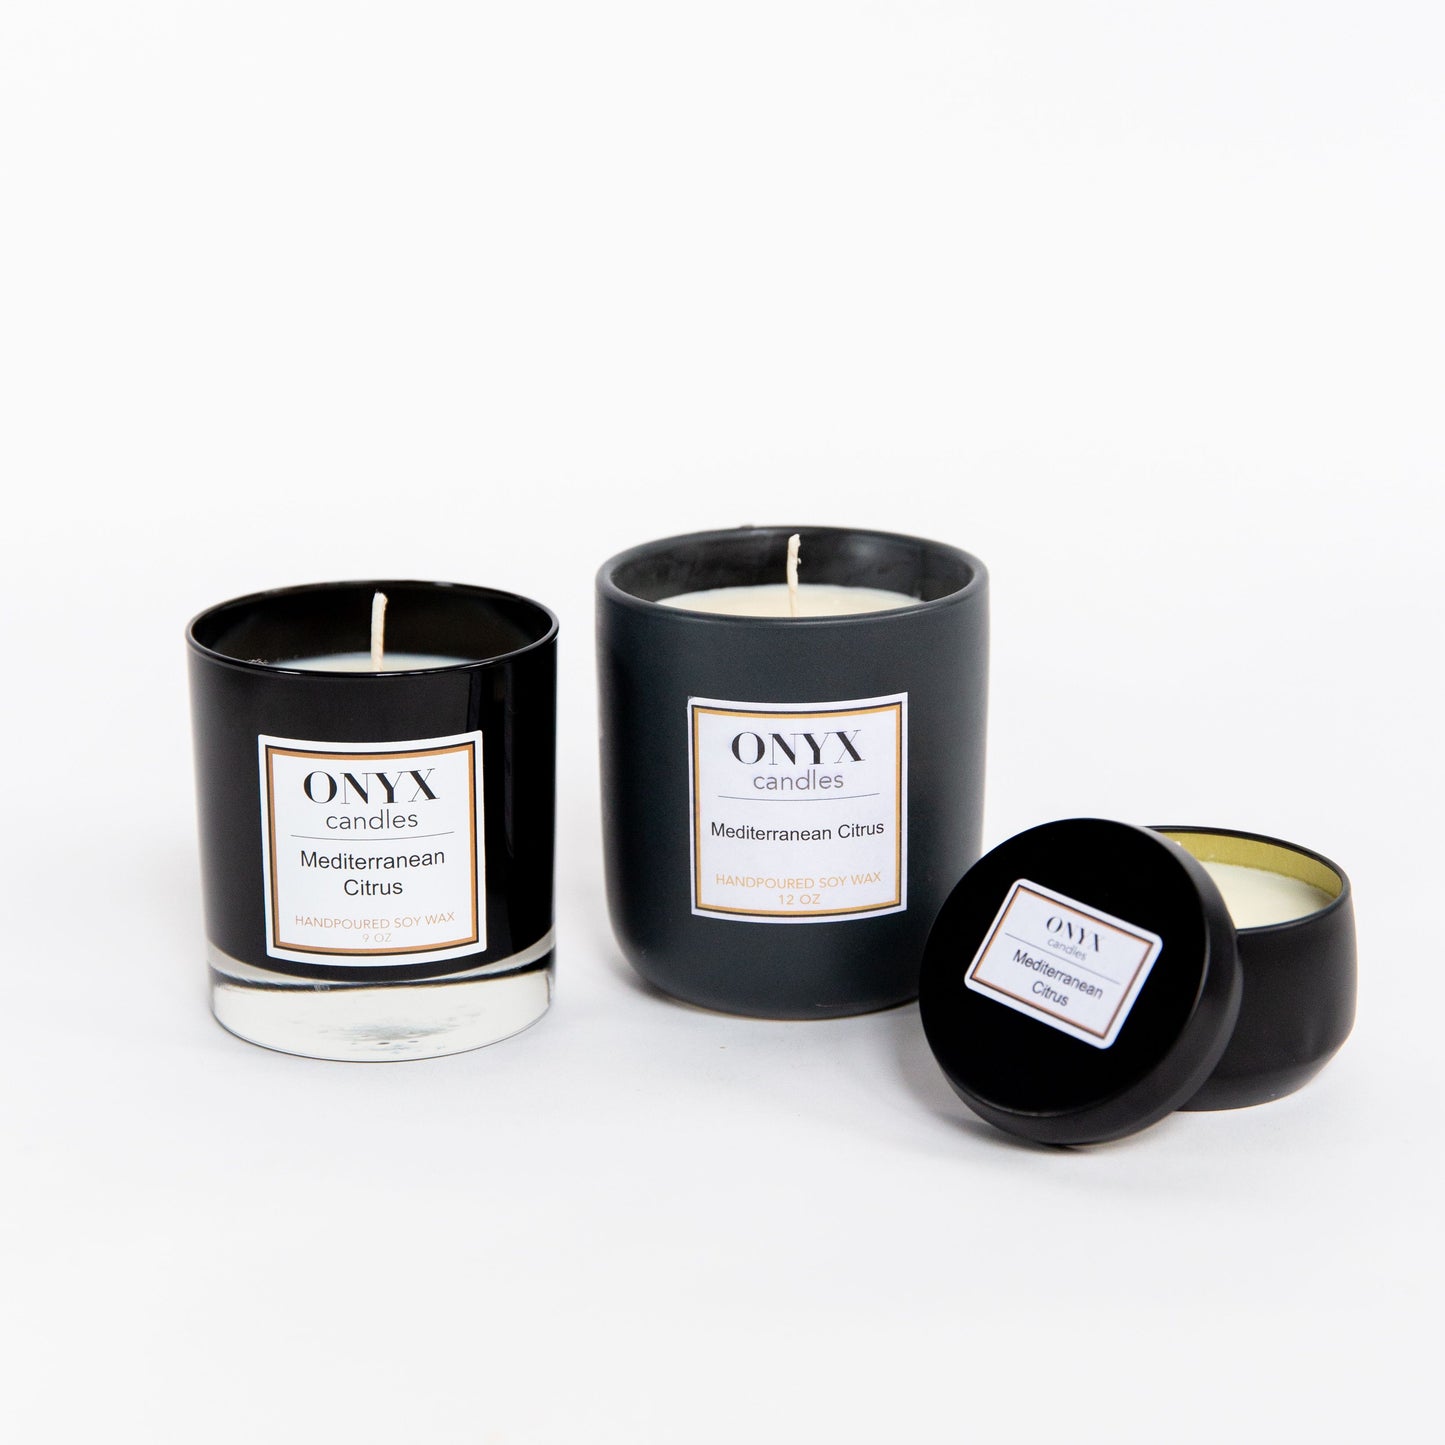 Three of the size variants available for Onyx candles scent Mediterranean Citrus